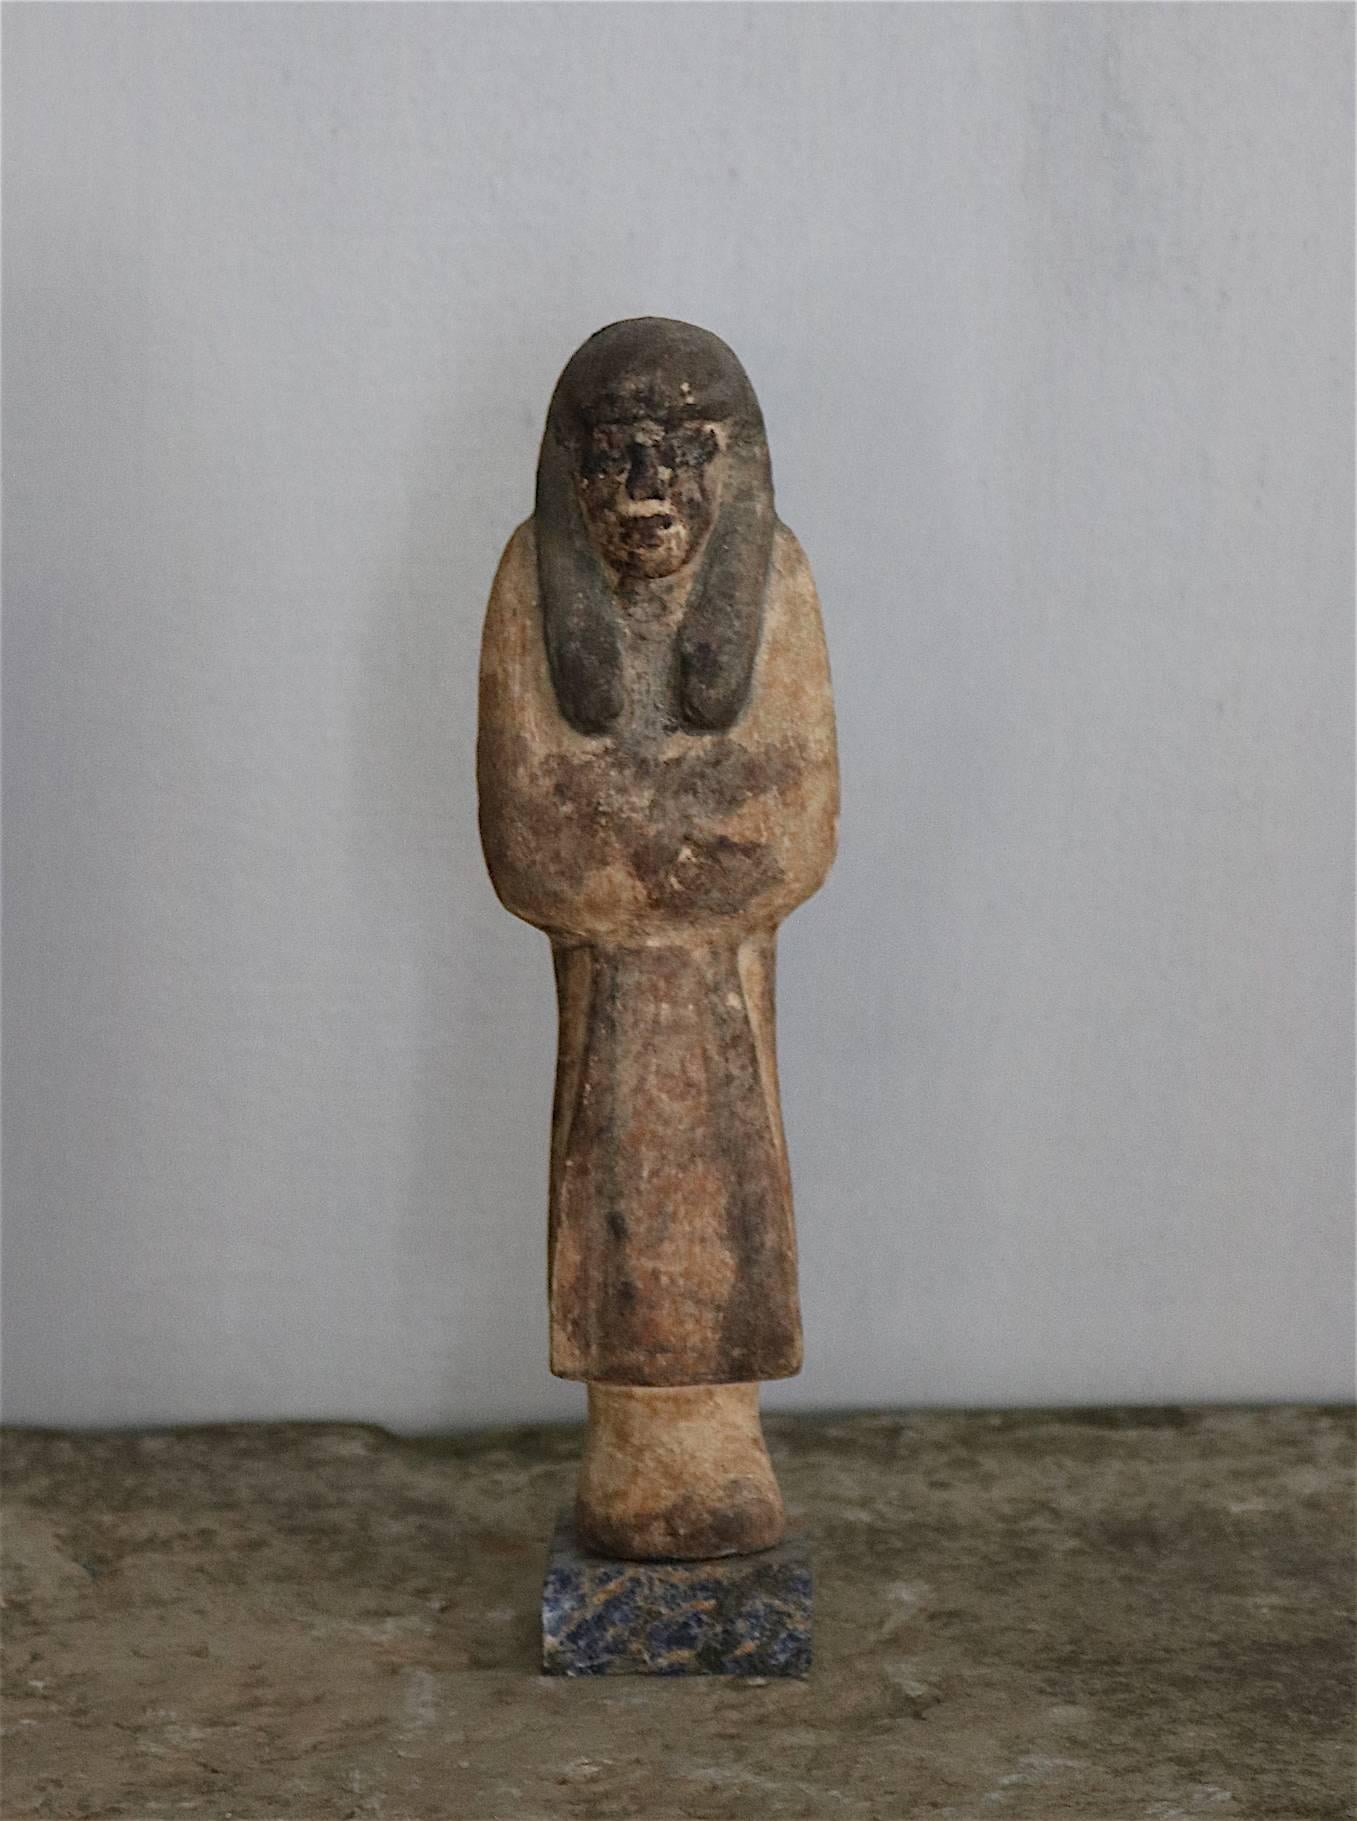 'Reis Ushabti' wooden figure from the ancient Egypt from the 20th-21st dynasty. Remians of paint.
Please note: This item is located in our New York City Studio and will be shipped from there.ase note, this item will be shipped from our New York City